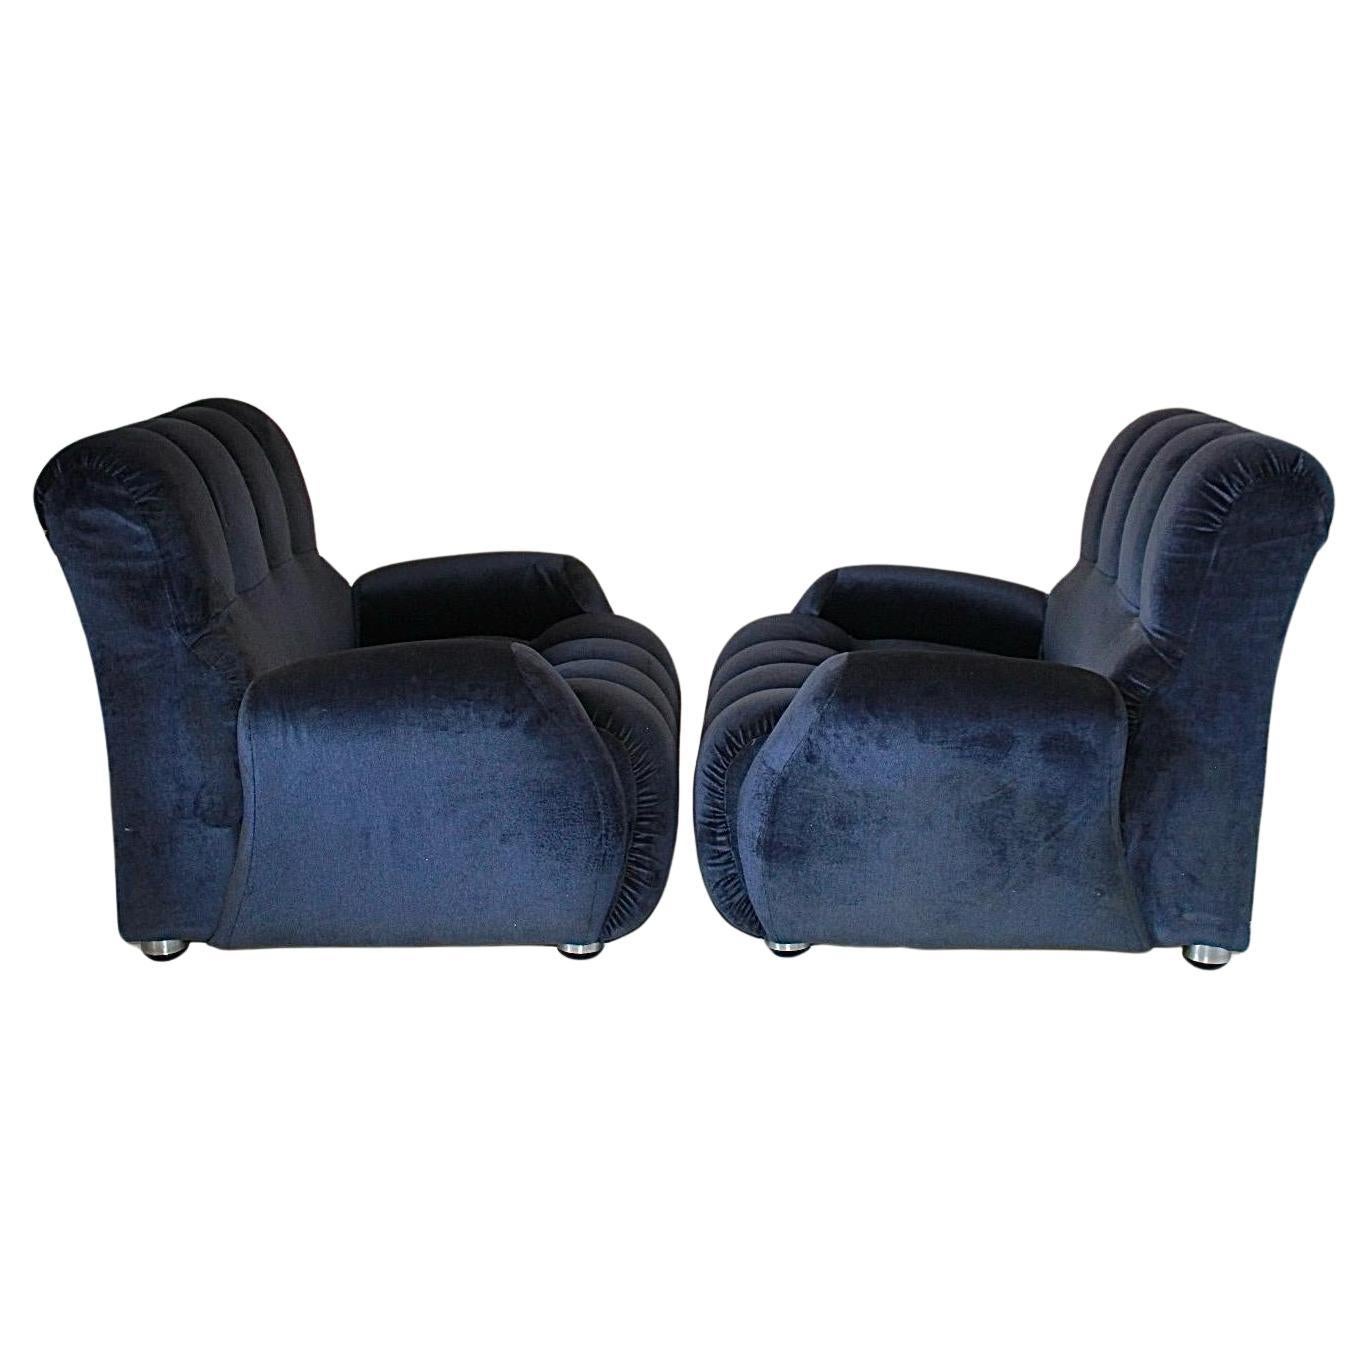 Vintage Velvet Blue Lounge Chairs, Set of Two, Manufactured in Italy in the 1980s
A beautiful 1980' s pair of blue velvet vintage armchairs. Made in Italy piece of design with elegant velvet pattern and chromed feets. Typical style from the 1980s